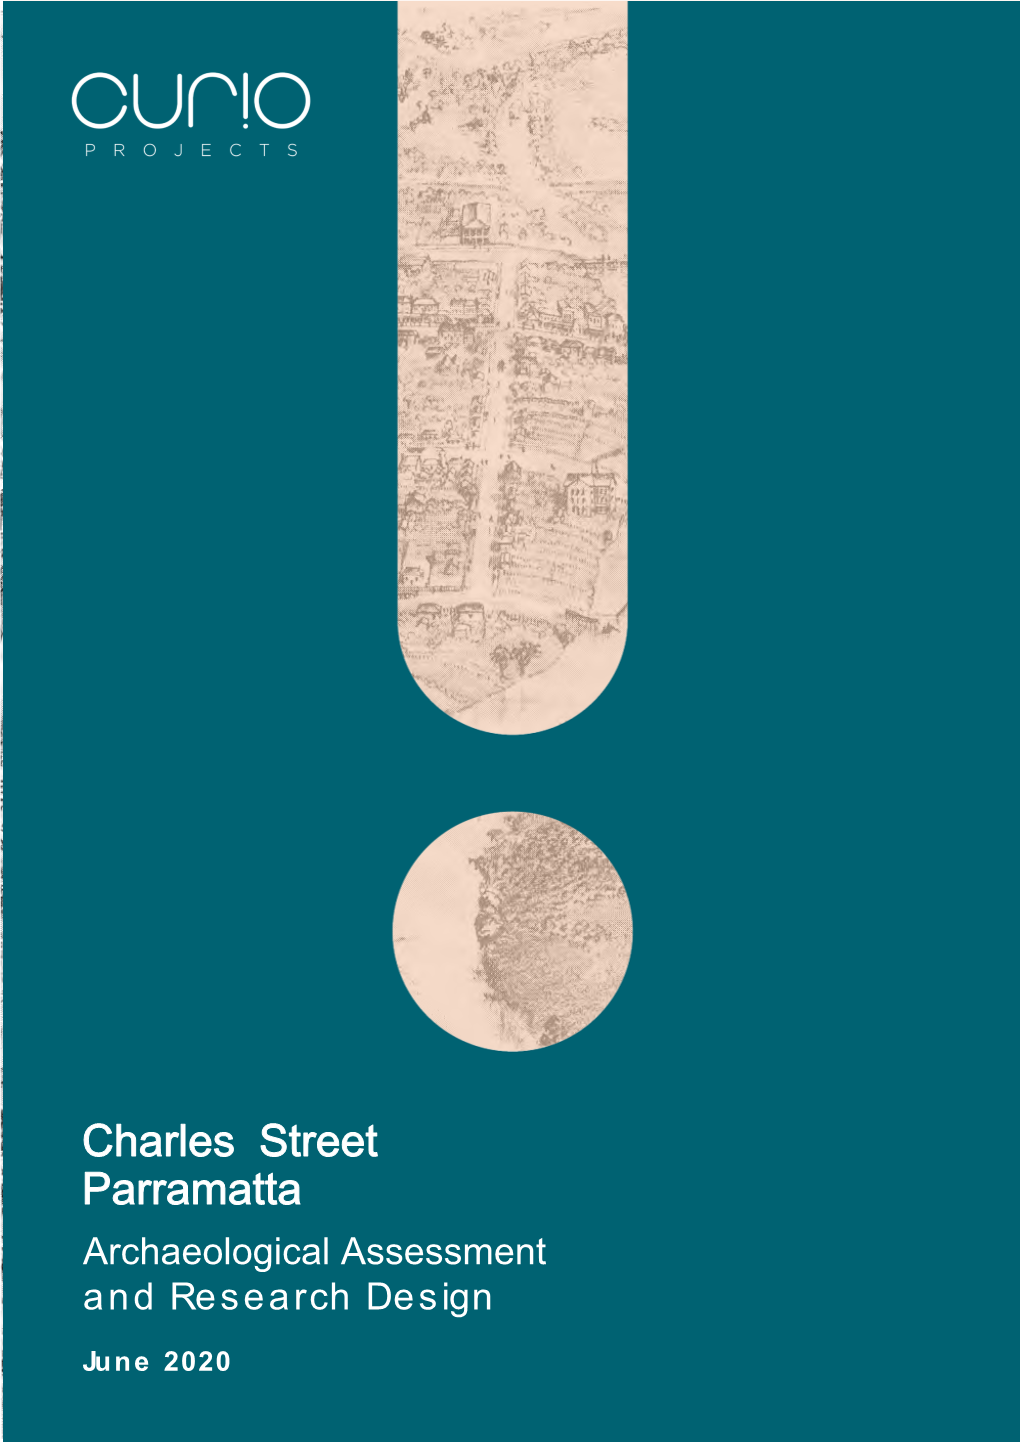 Charles Street Parramatta Archaeological Assessment and Research Design